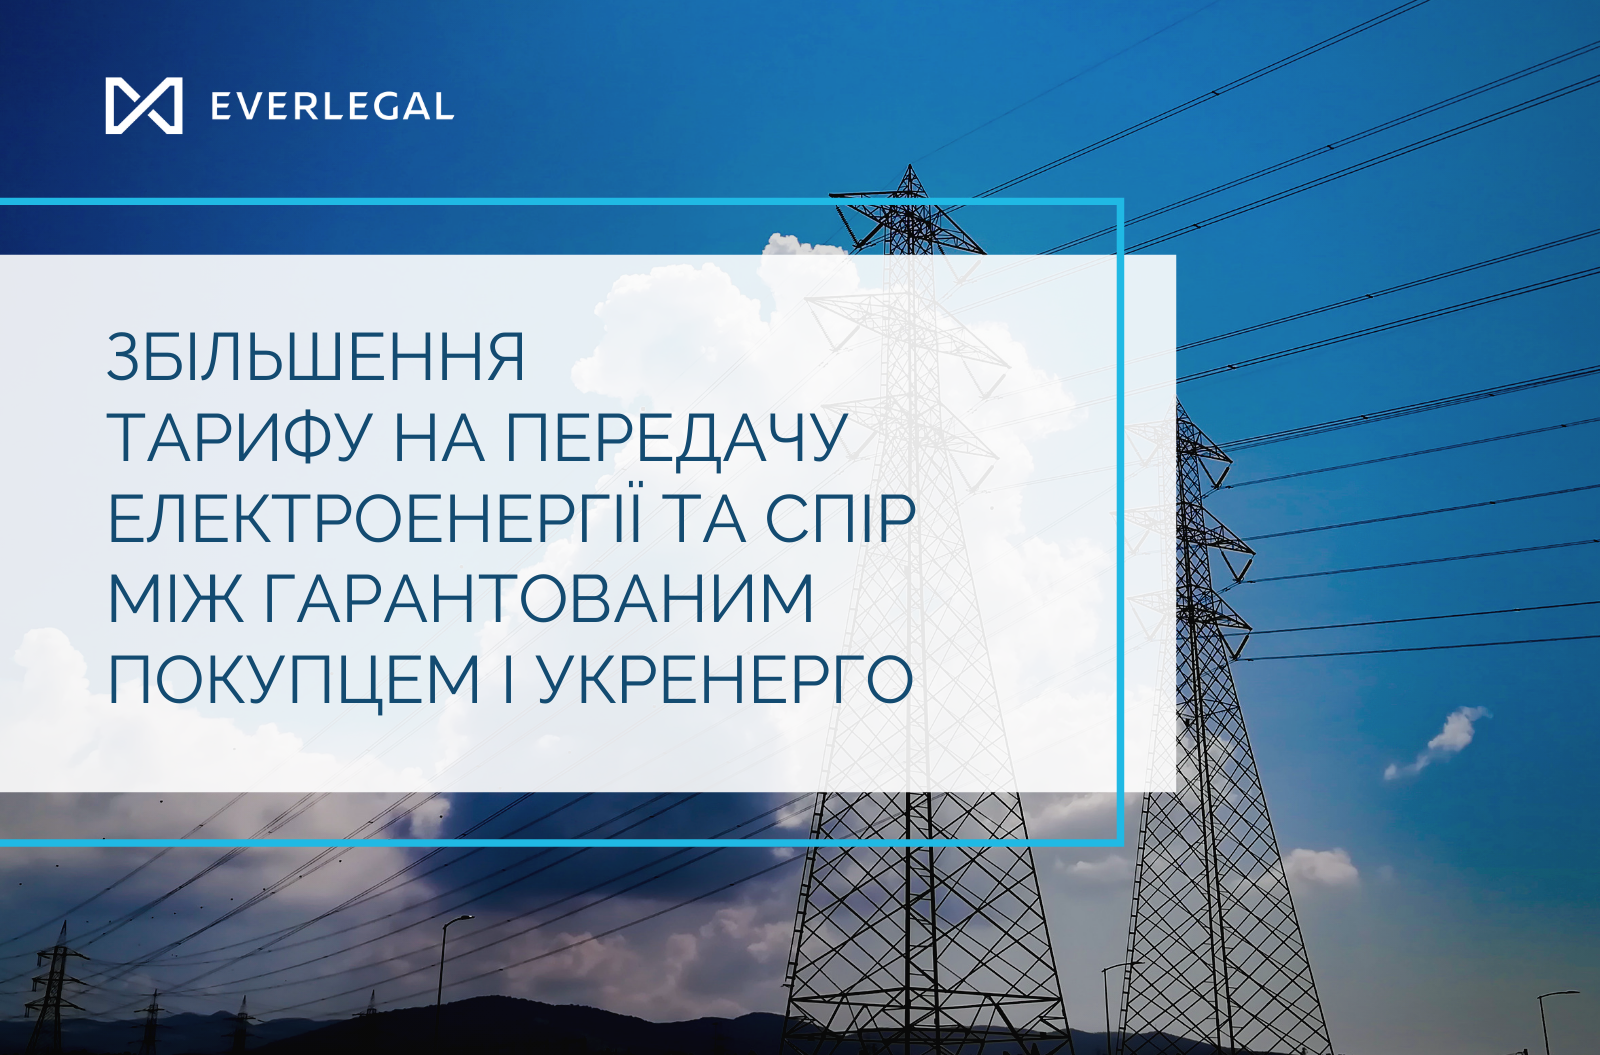 Increase of the tariff for electricity transmission and the dispute between the Guaranteed Buyer and Ukrenergo